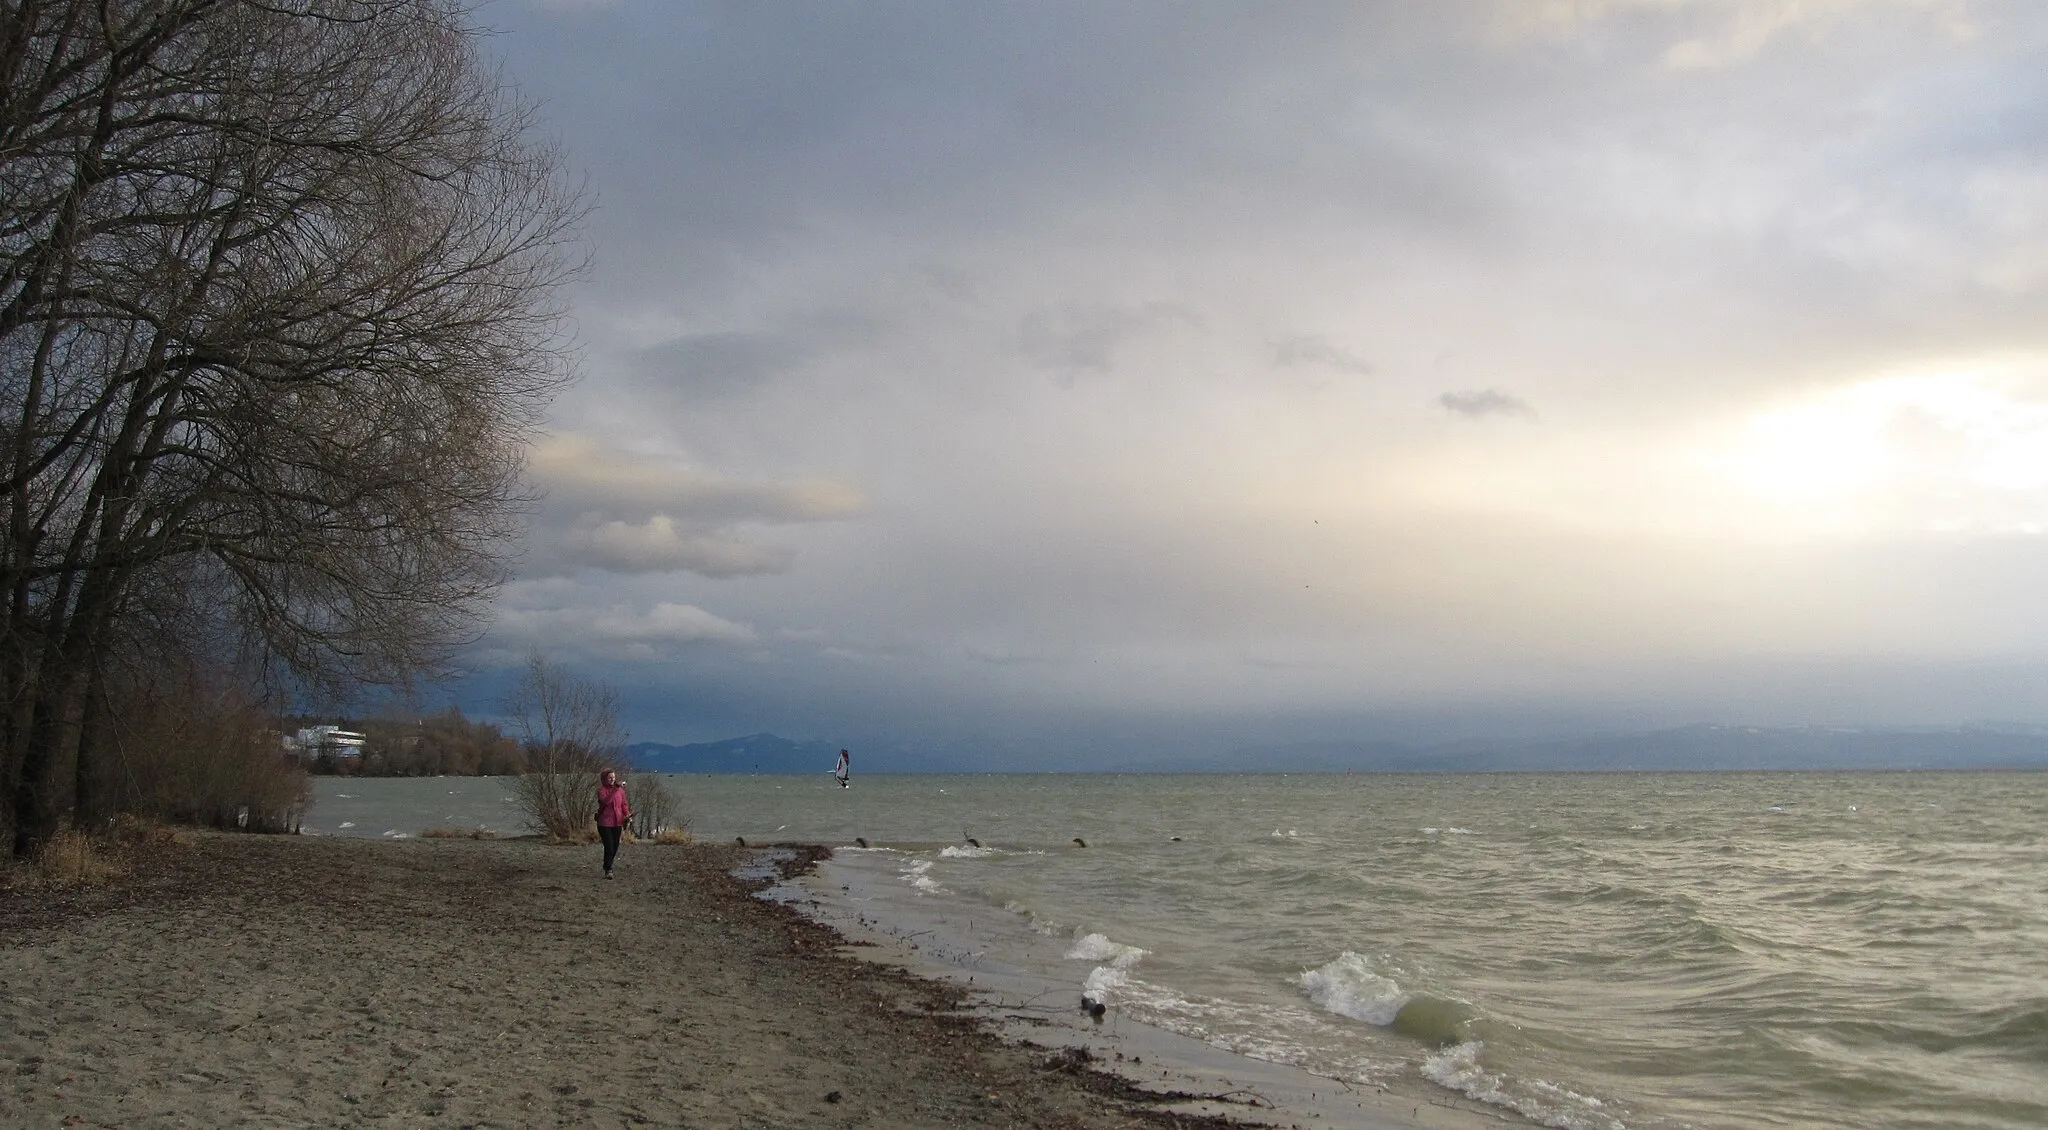 Photo showing: During the last two decades the beach area of this part of Lake Constance had been redesigned according to ecollogical criteria. Concrete walls along the beach had been removed; the shore had been flattened in order to enlarge the beach area as well as to strengthen the habitat function of the shallow water zone.